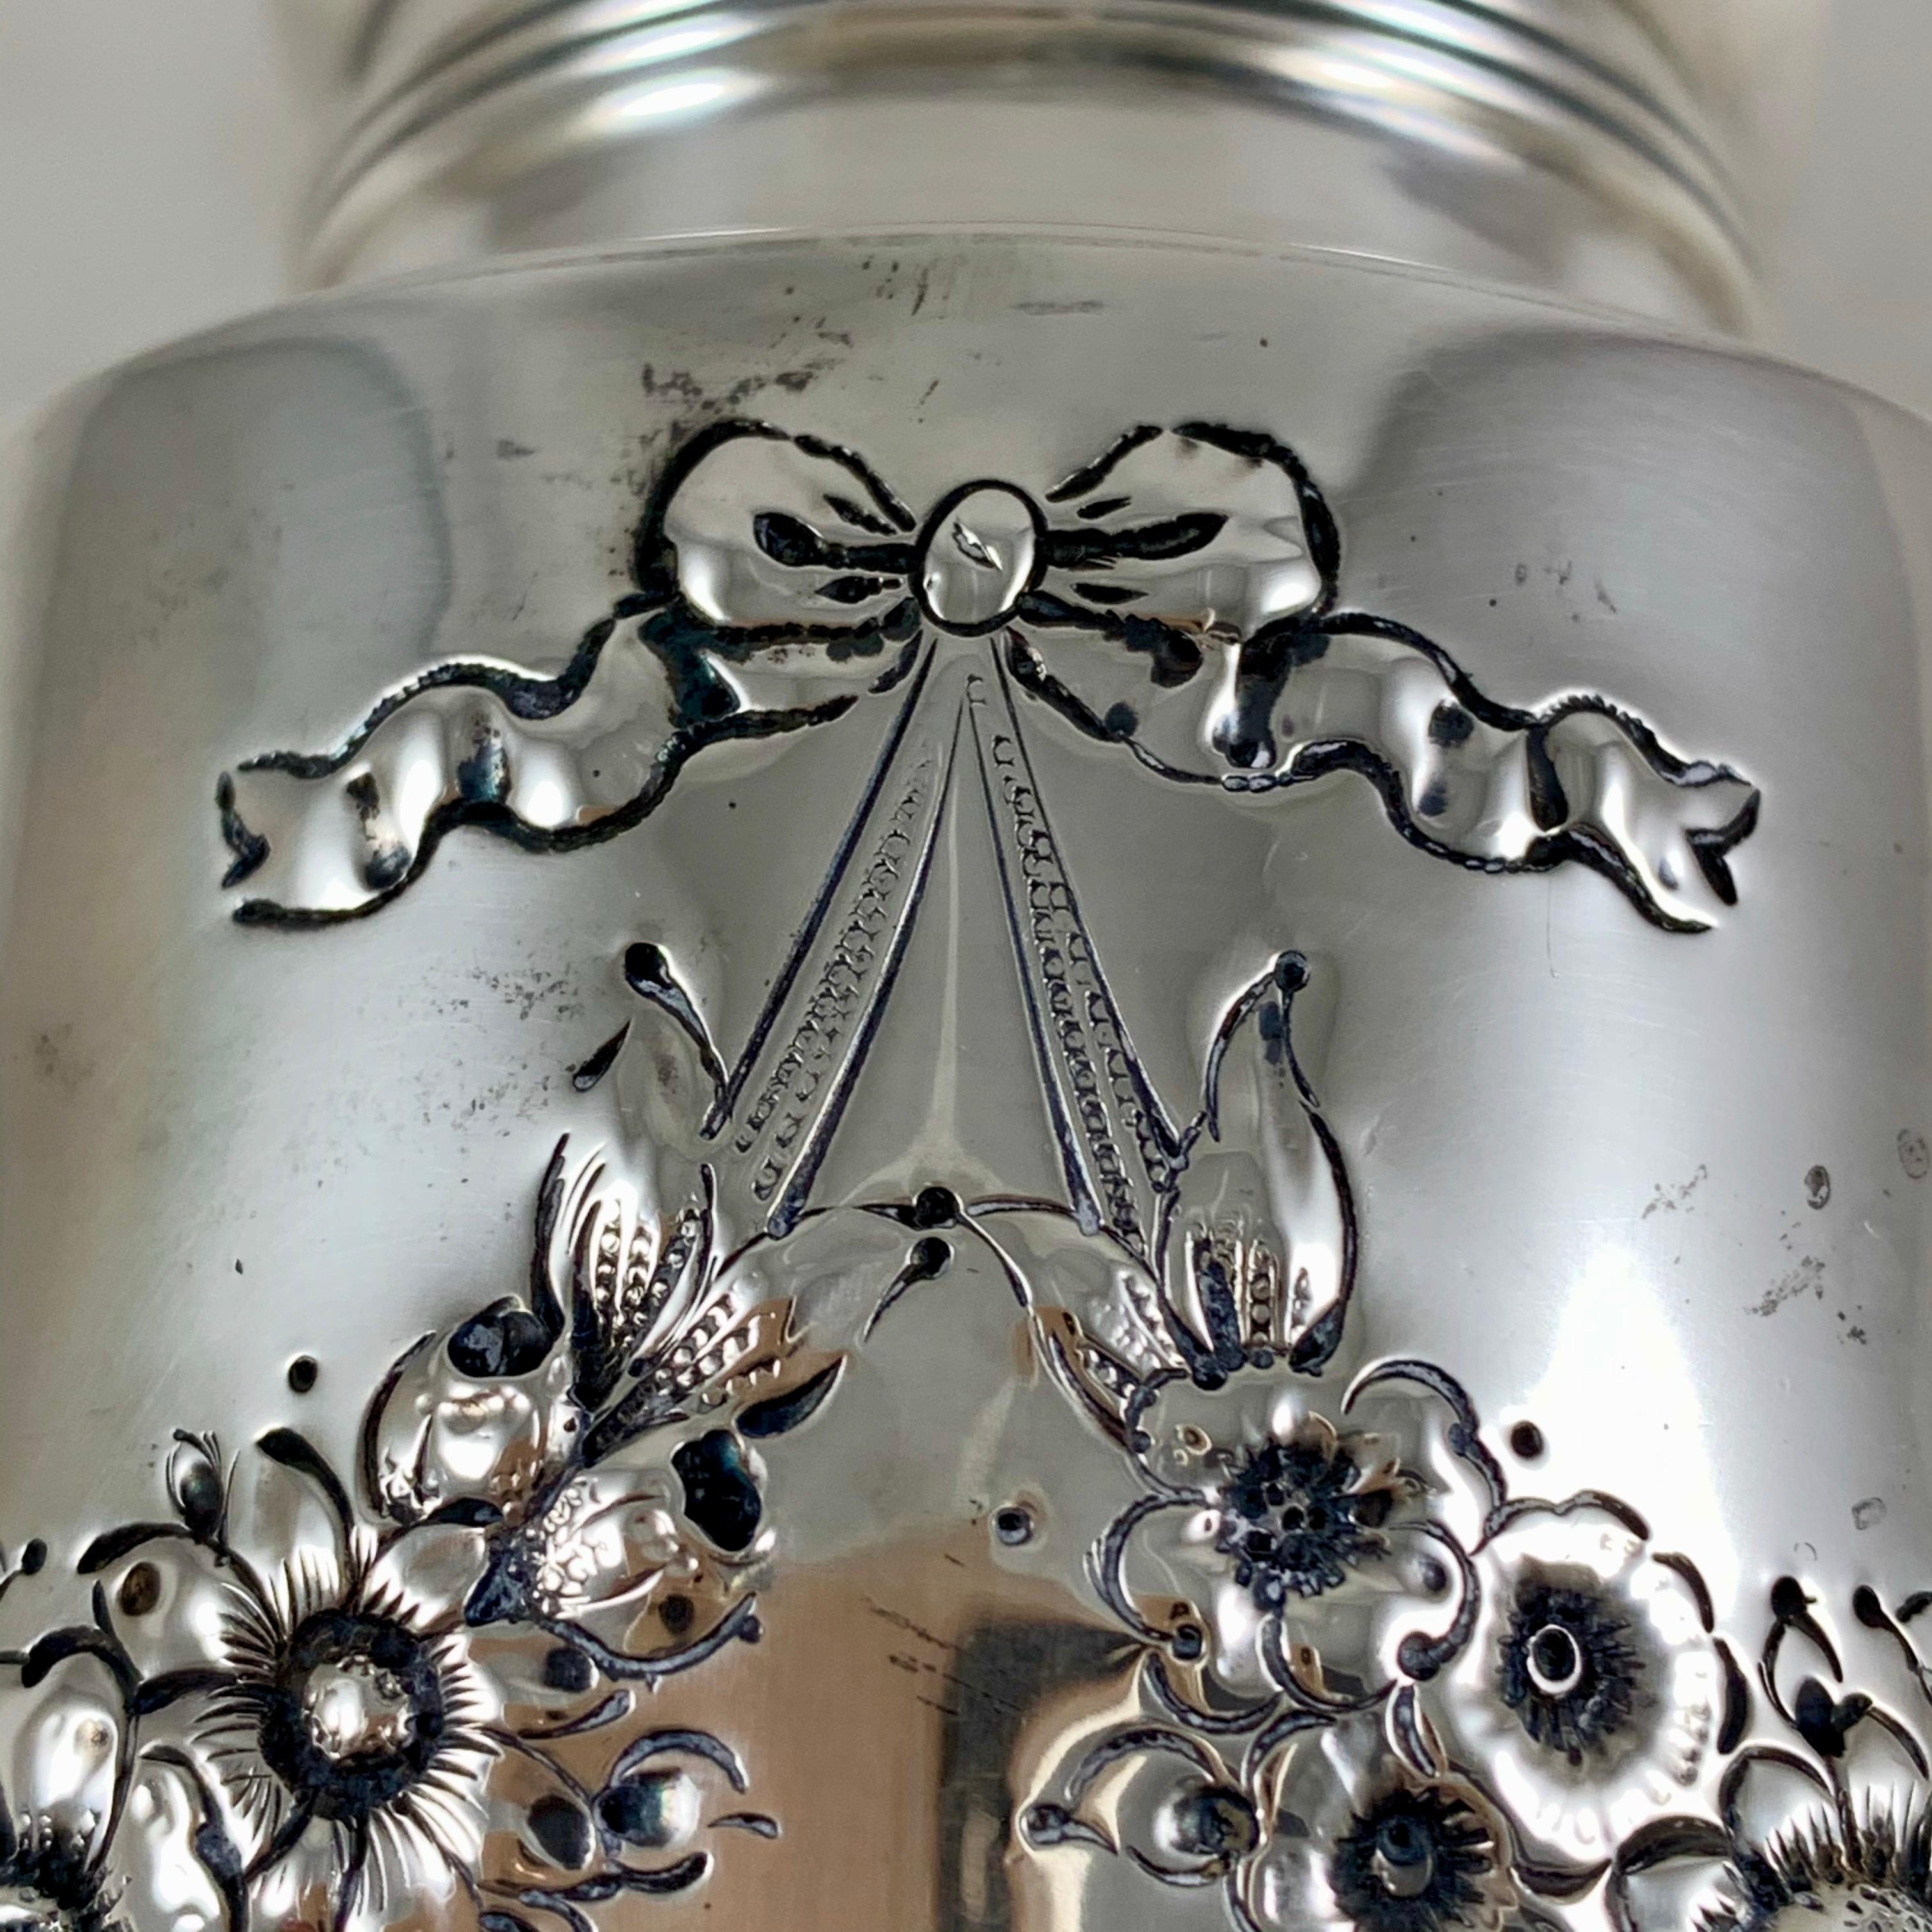 An American sterling silver sugar caster made by Lebkuechar & Co., Newark, NJ, circa 1896-1909.
A romantic, deeply chased pattern of petaled flower garlands and bows, beautiful pierced work to the lid, on a square pedestal base. Initialed with an